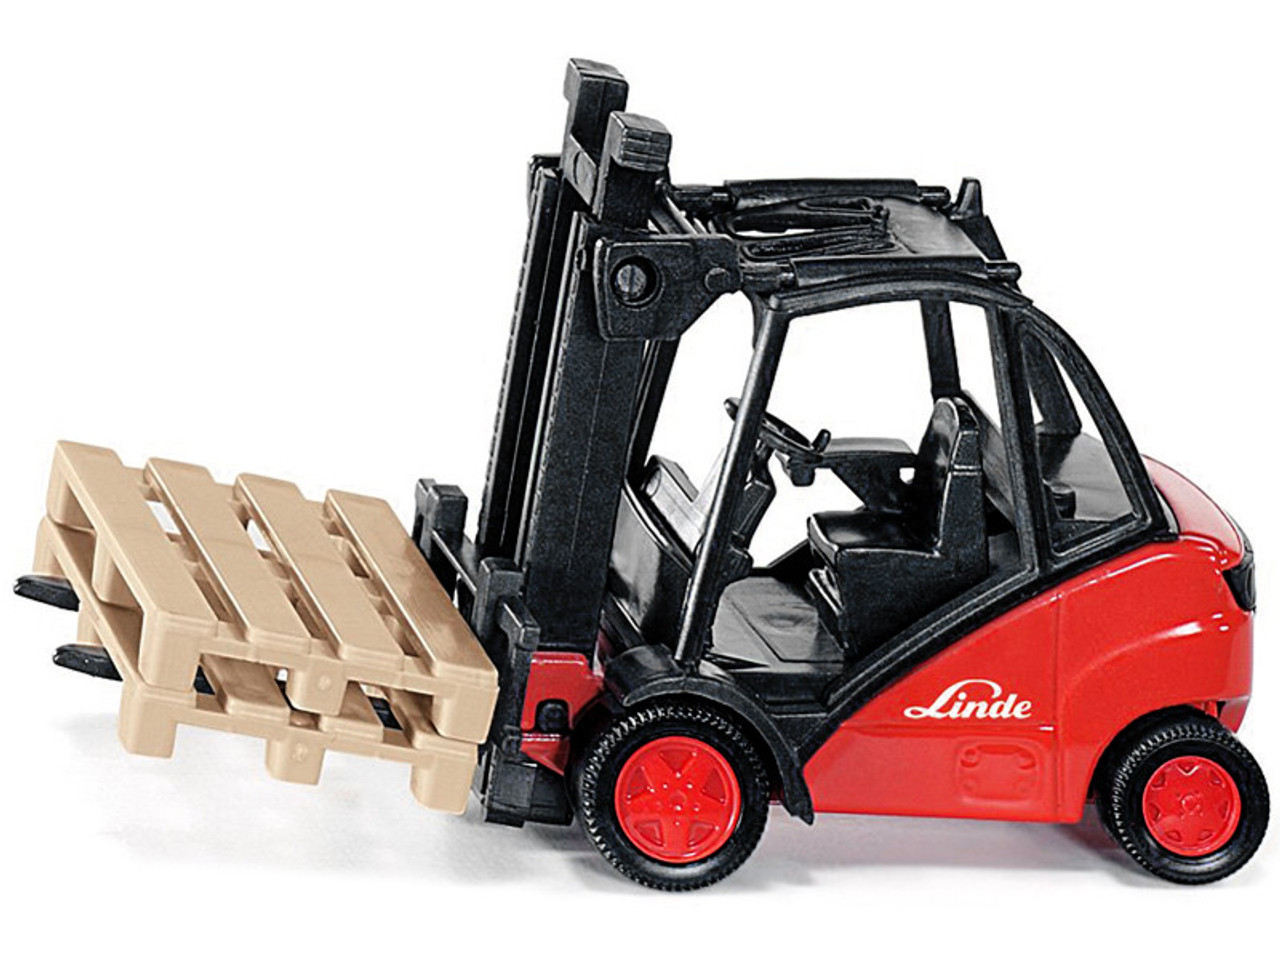 Linde Forklift Truck Red with 2 Pallet Accessories 1/50 Diecast Model by Siku